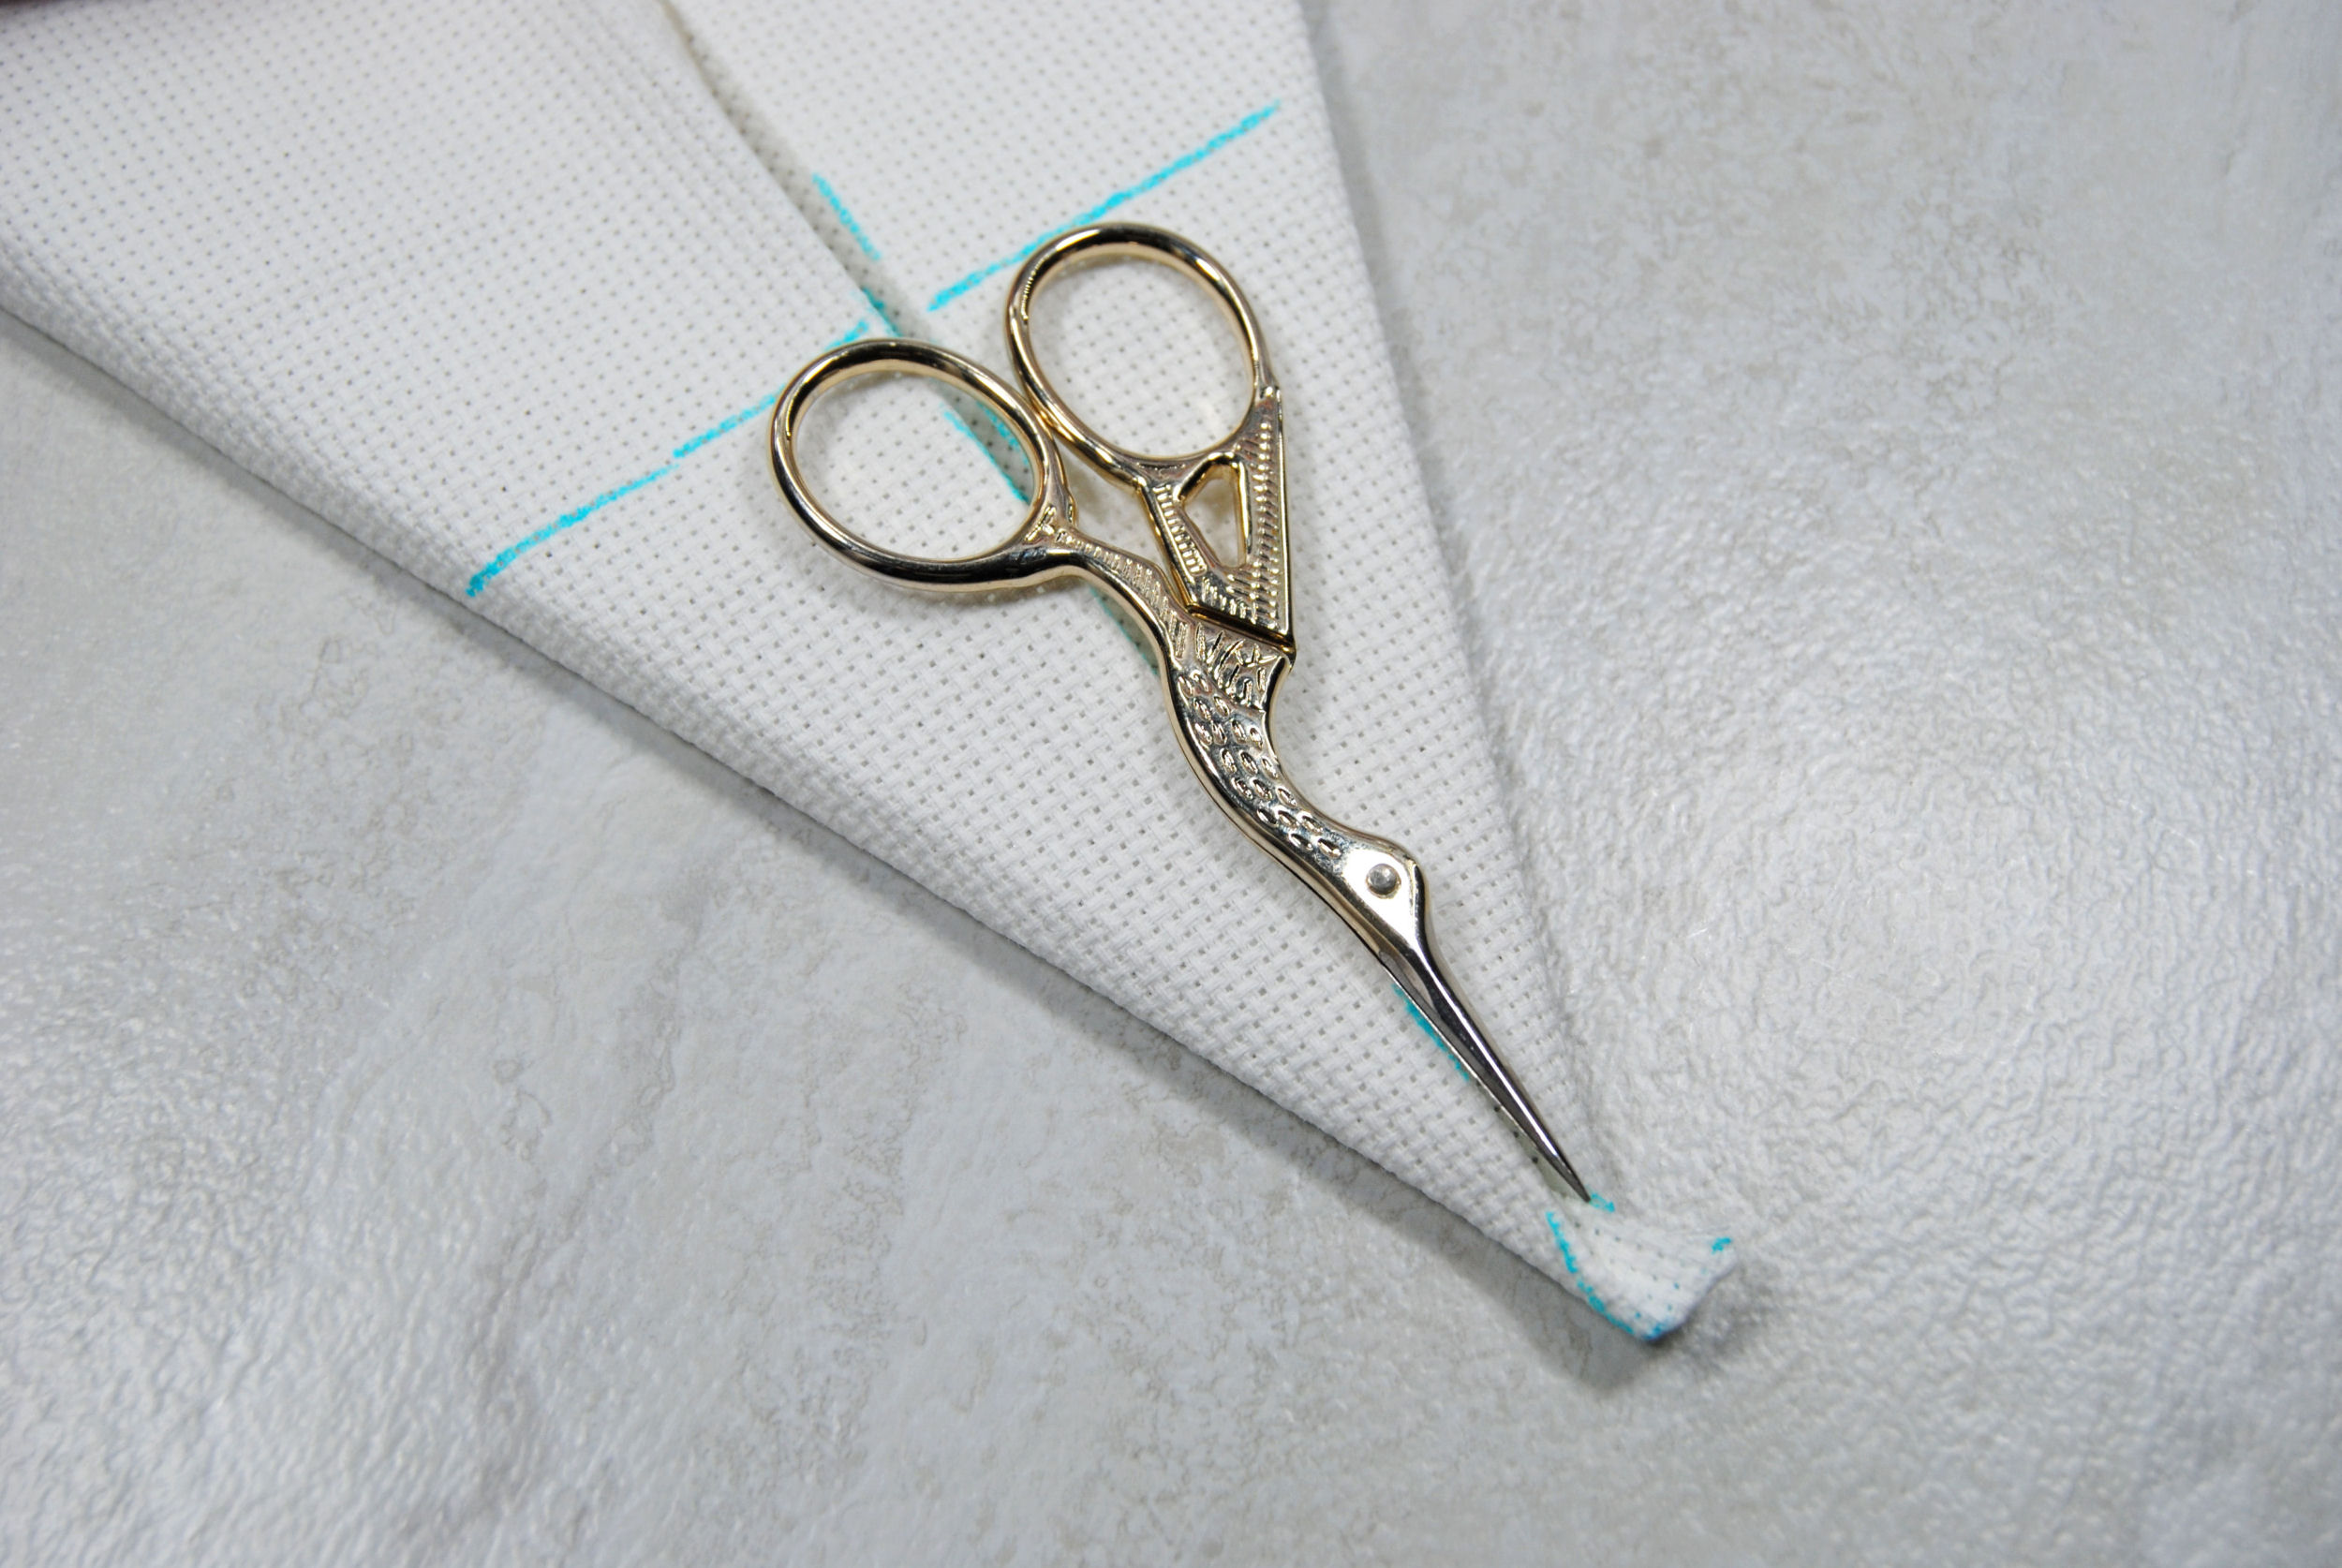 Protective Sleeve Embroidery Yarn Scissors Small Thread Sewing, U-Shaped  Yarn Cut with Cover Cross Stitch Small Scissors Line Cut